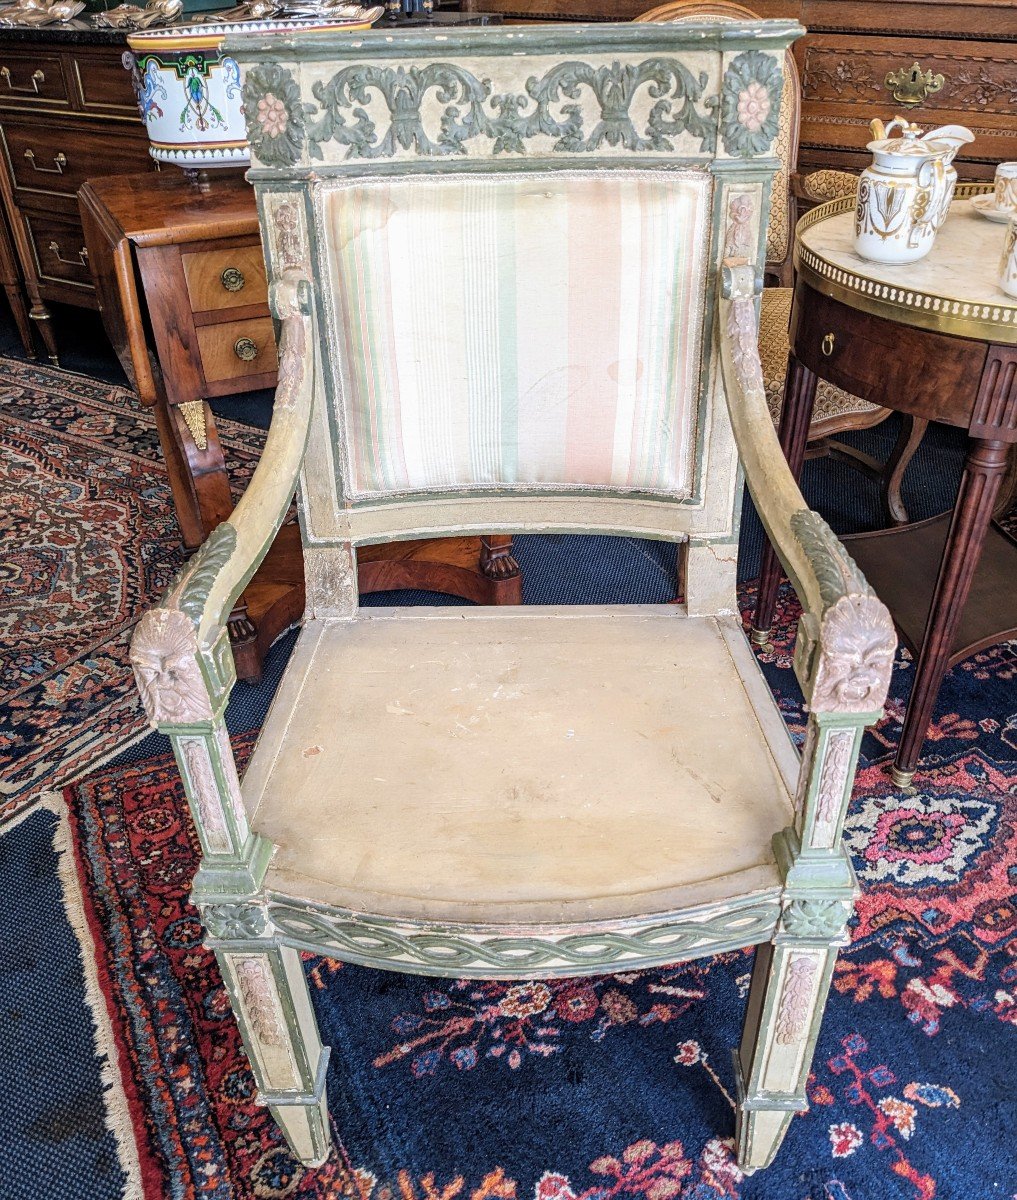 19th Century Painted Wooden Armchair Italy Piedmont?